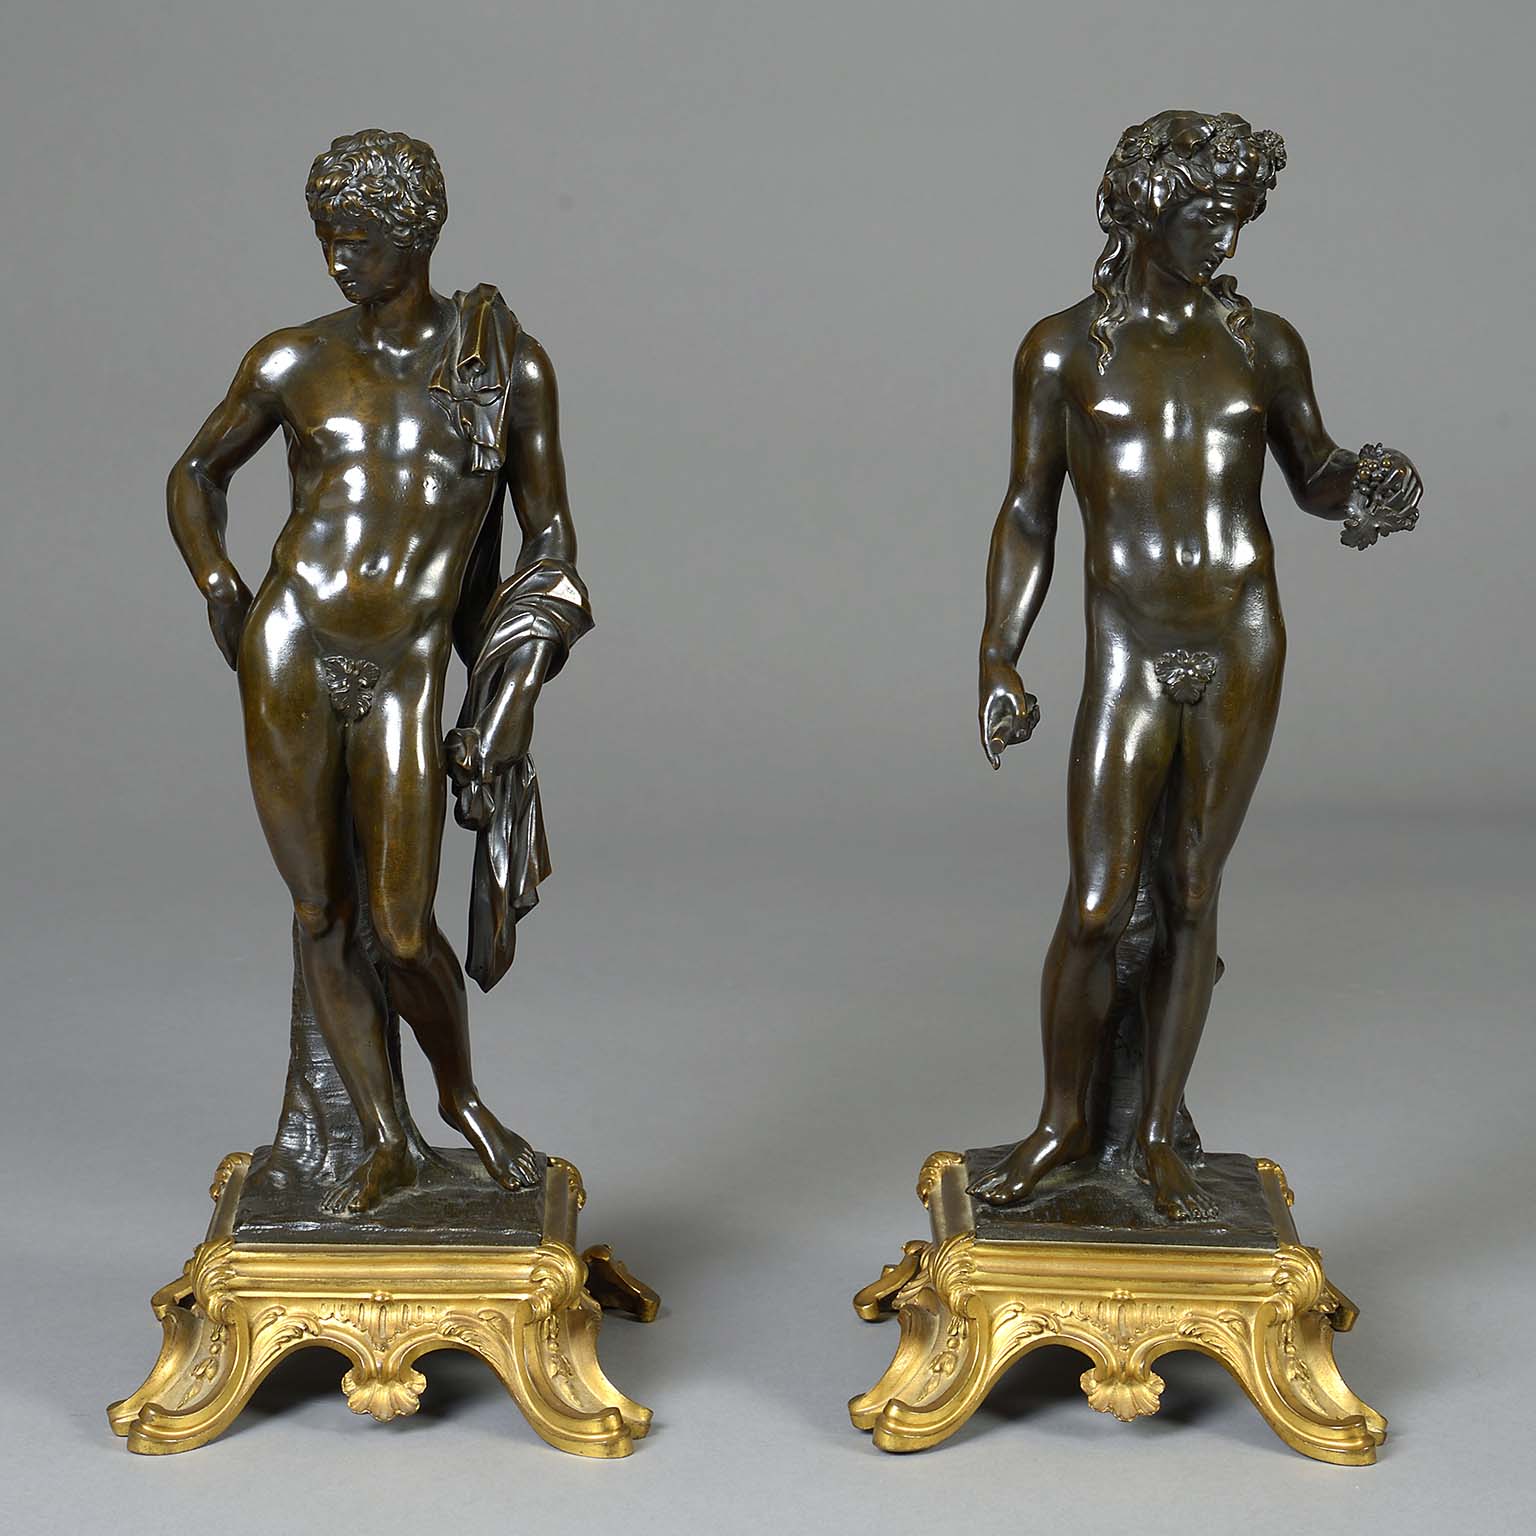 Pair of Neo-Classical Bronzes of Antinous and Bacchus on Gilt bronze Bases